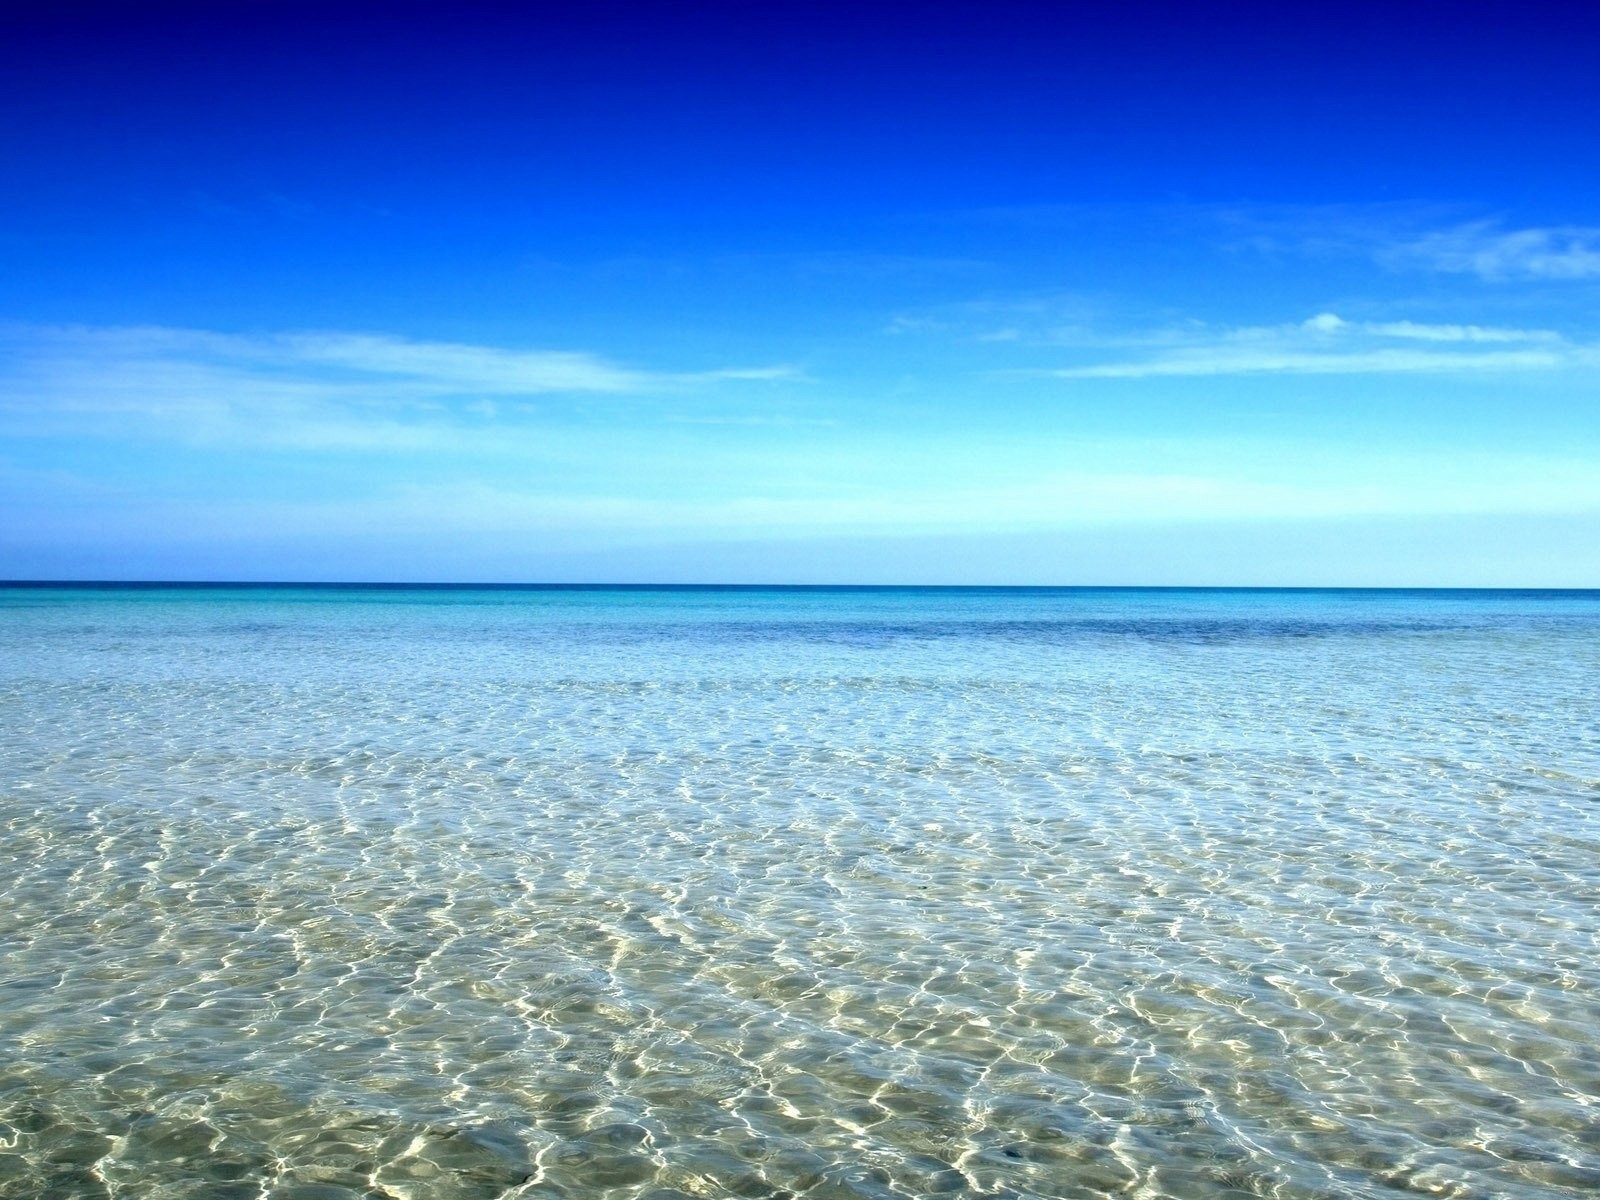 Shallow water near the shore